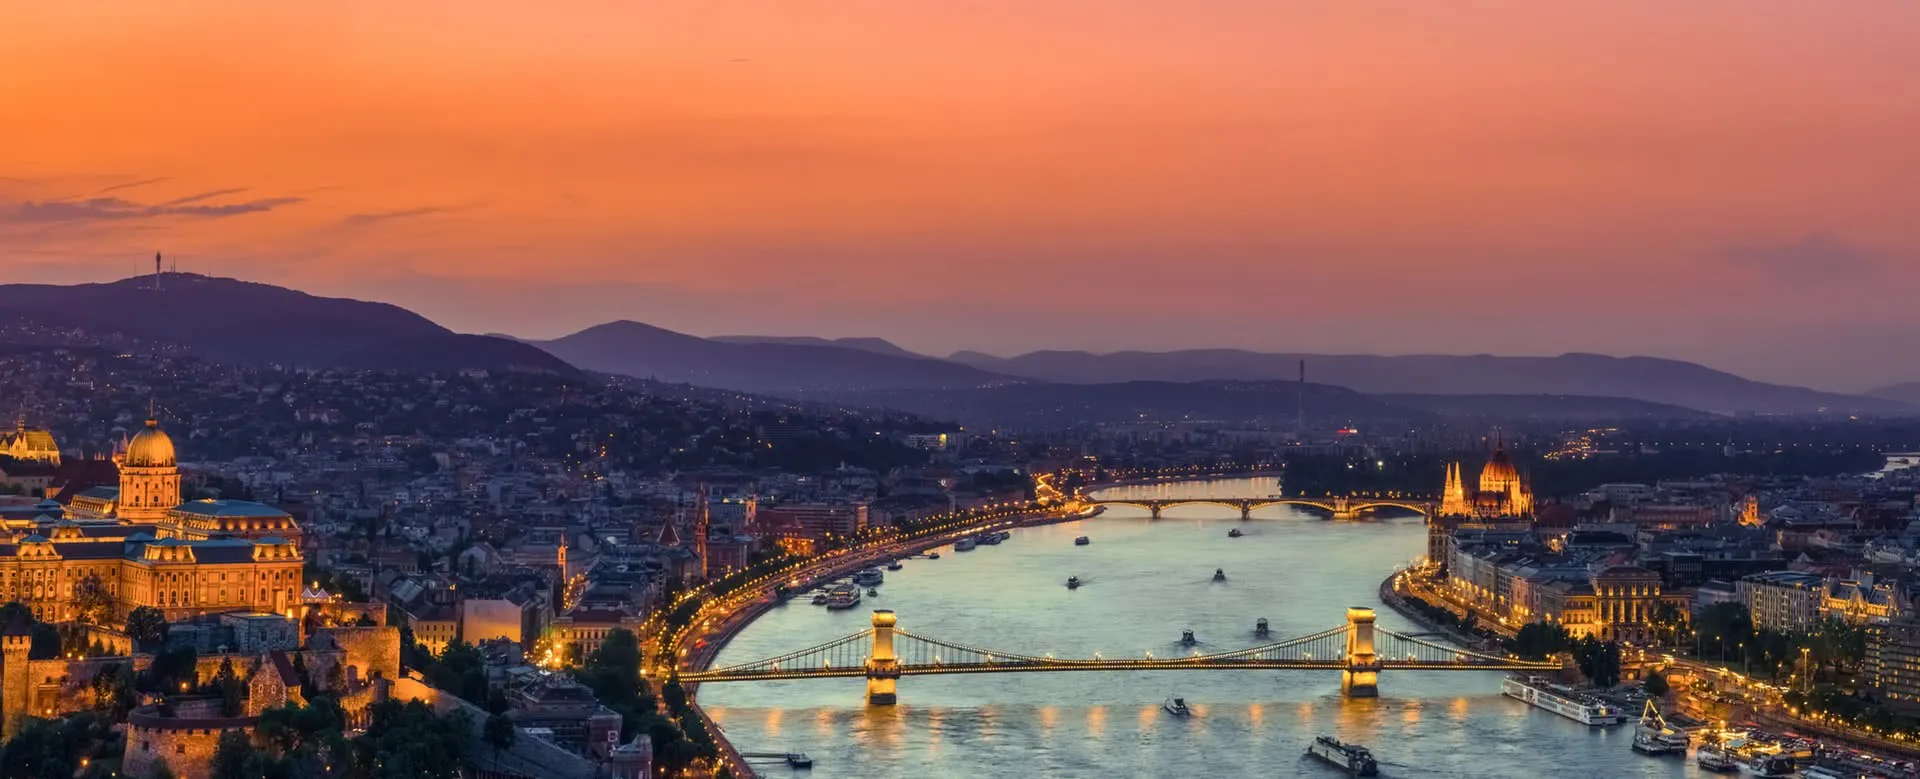 Budapest - the destination for school trips